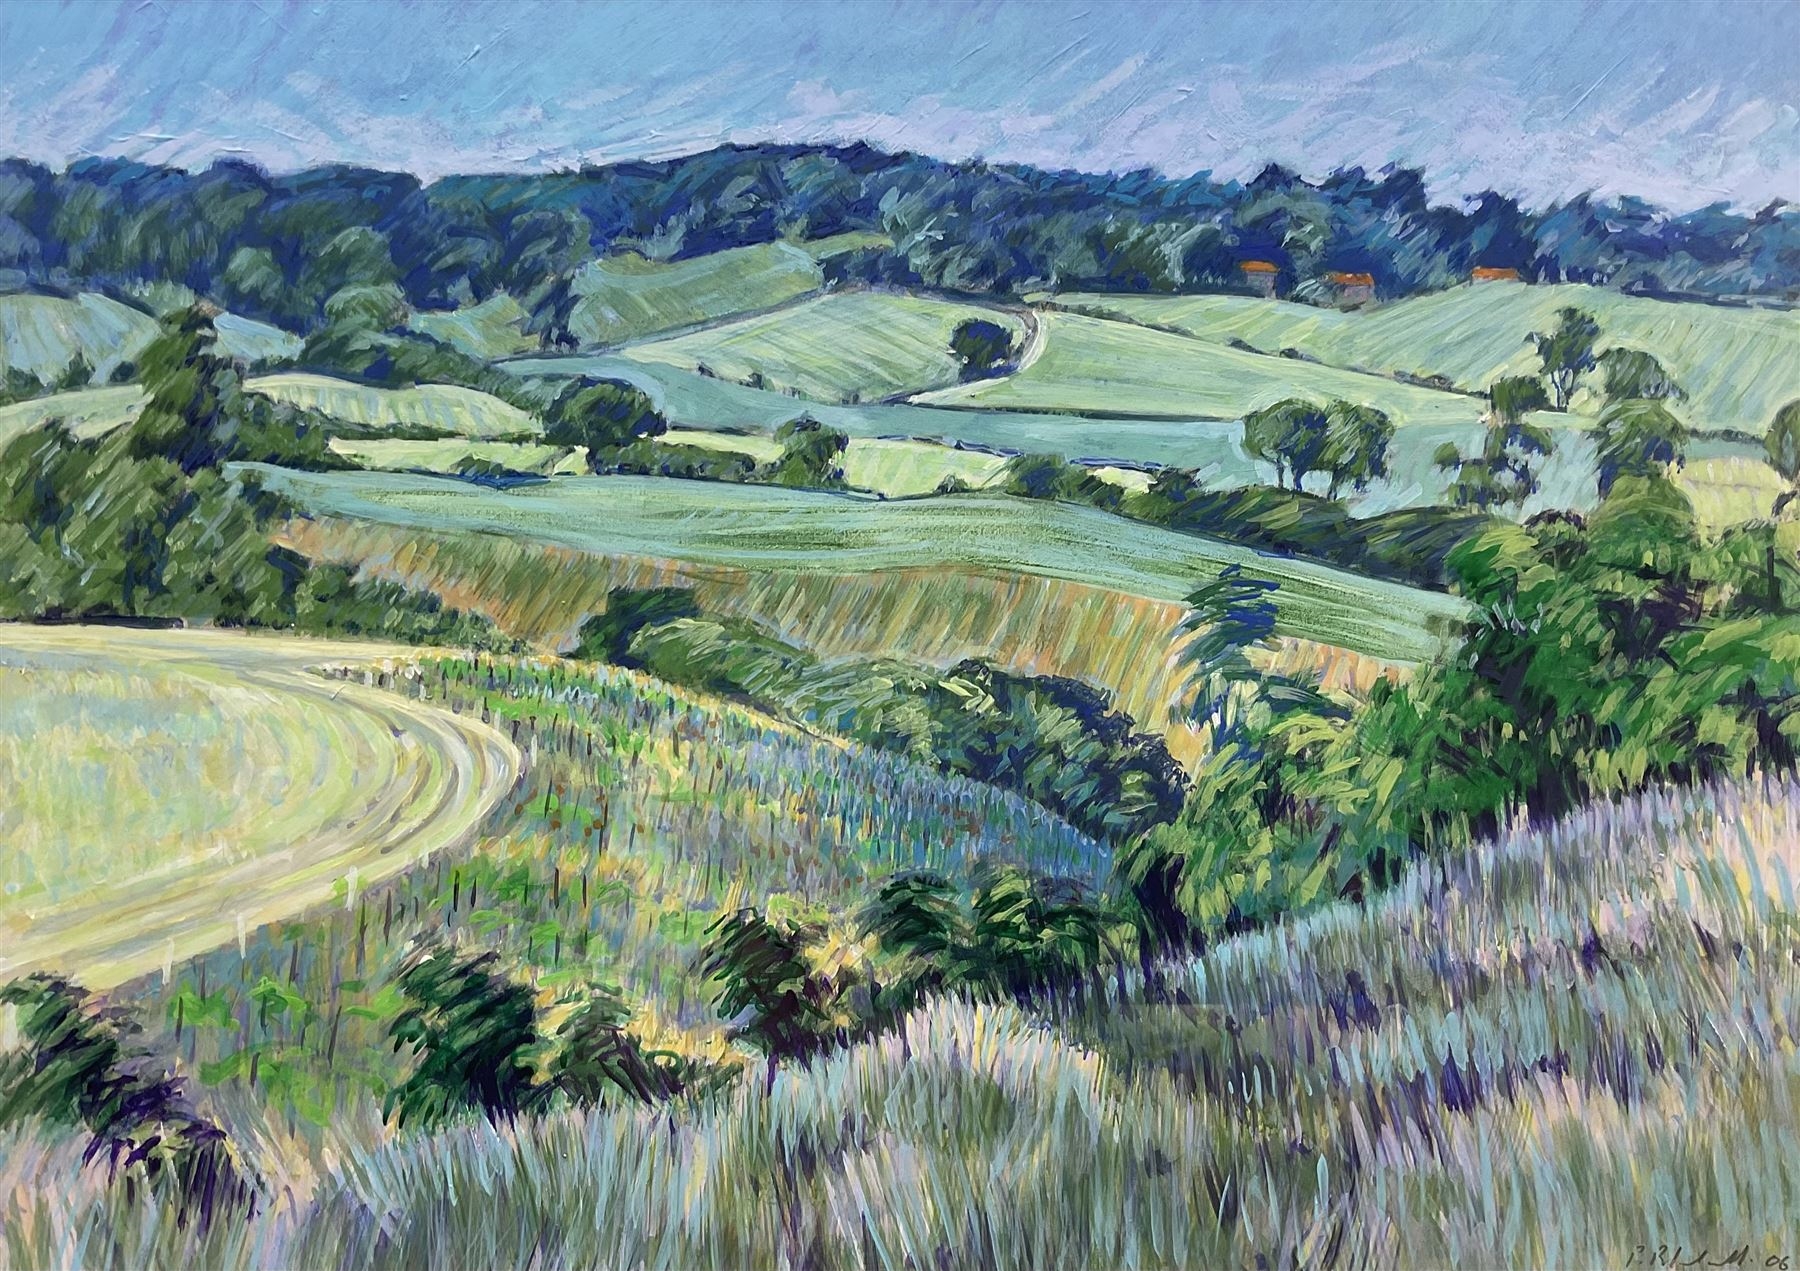 Artwork by Paul Blackwell, 'The New Plantation - Esk Valley', Made of acrylic